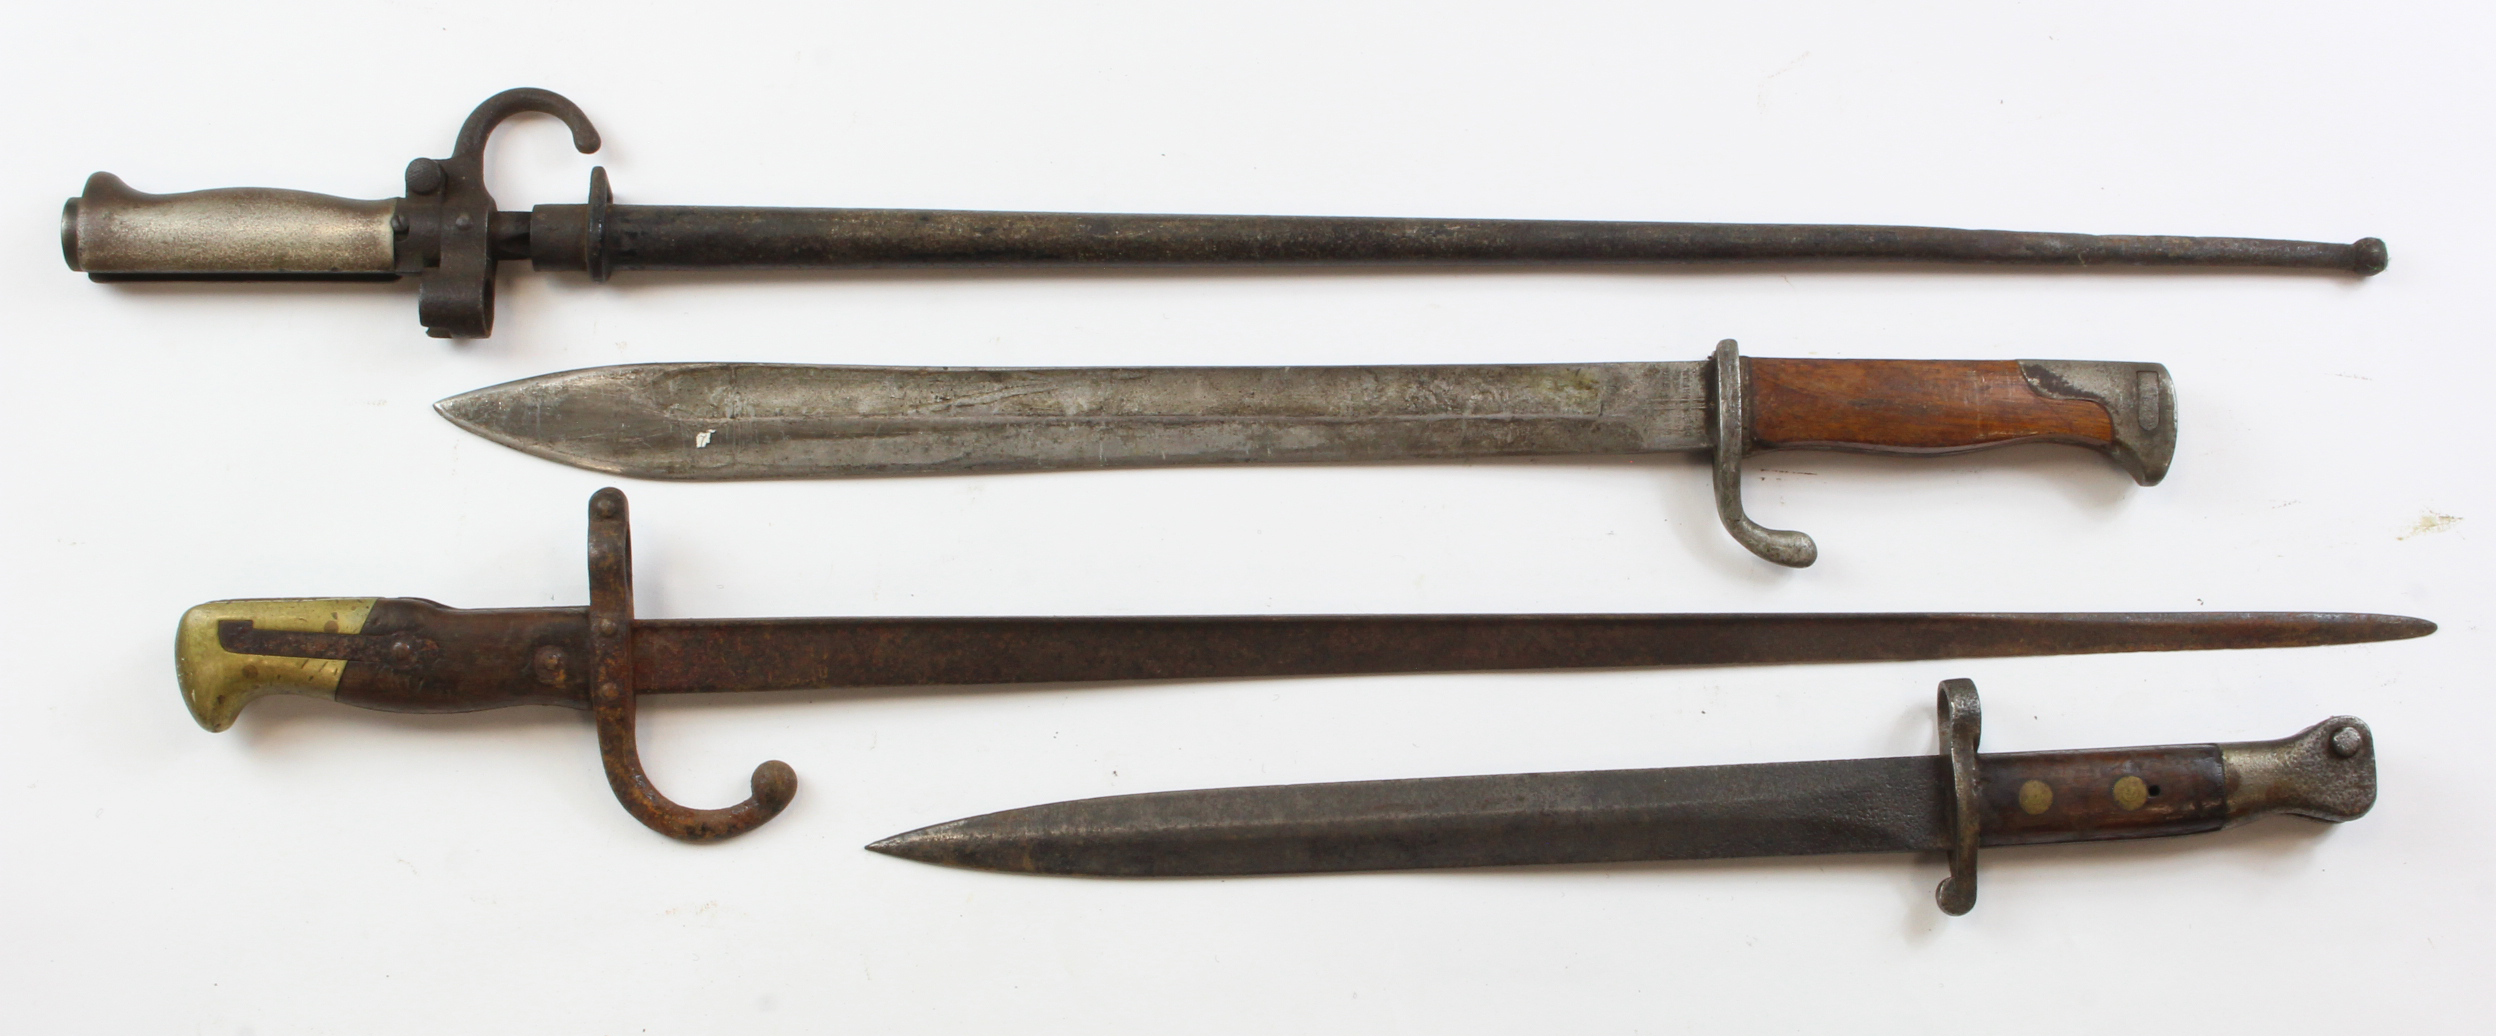 Bayonets - Gras Epee, no Scabbard, Mod 1874, rusted. A French Mod 1886 Epee in steel Scabbard.